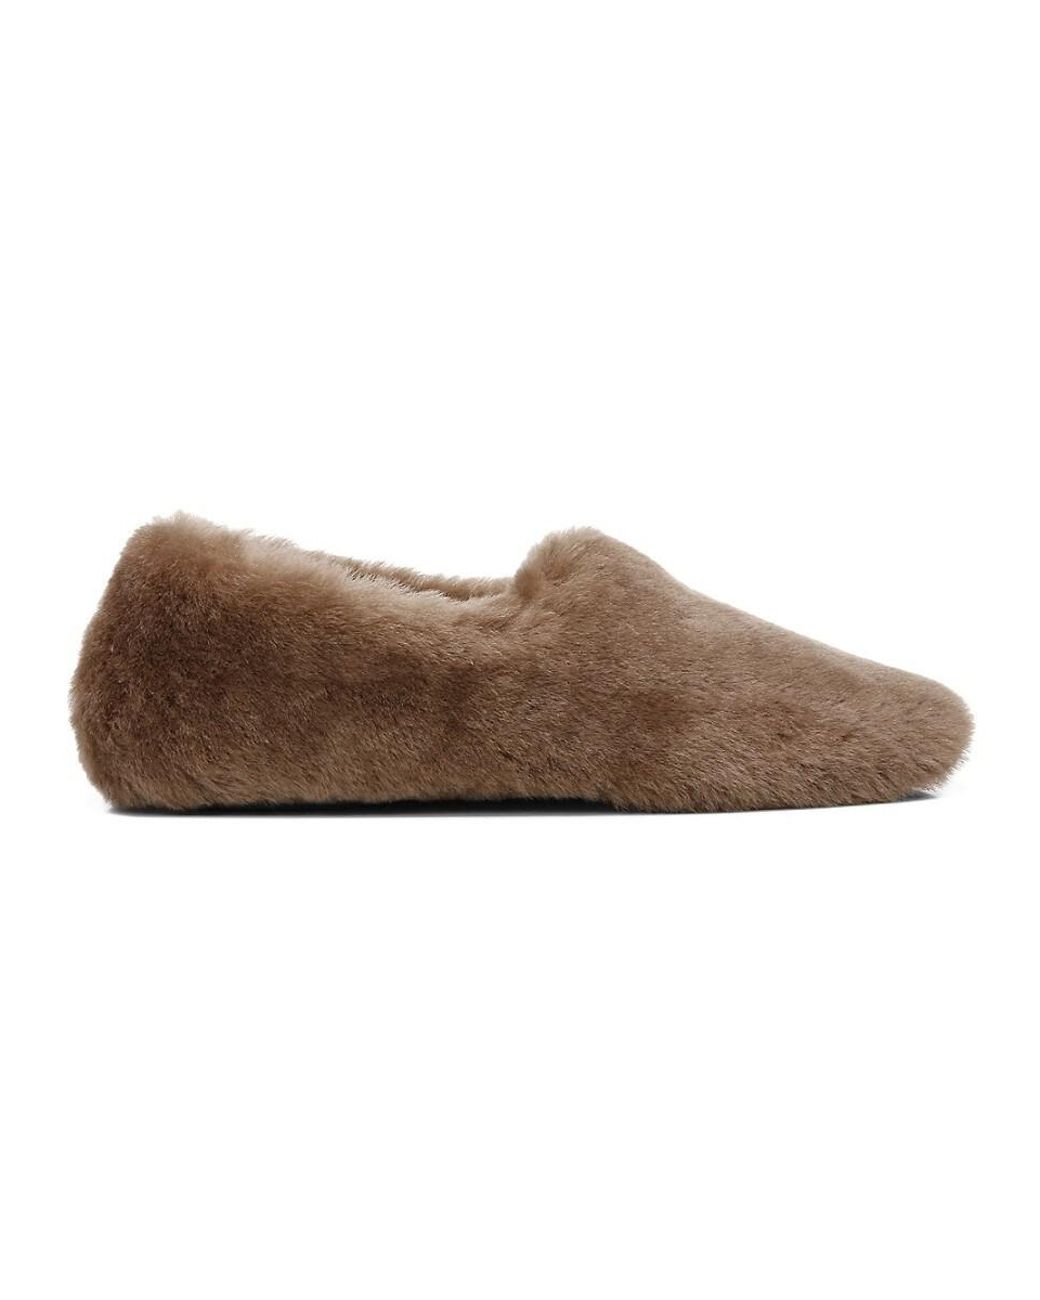 Vince Leather Emet Sheep Shearling Slippers in Tan (Natural) | Lyst